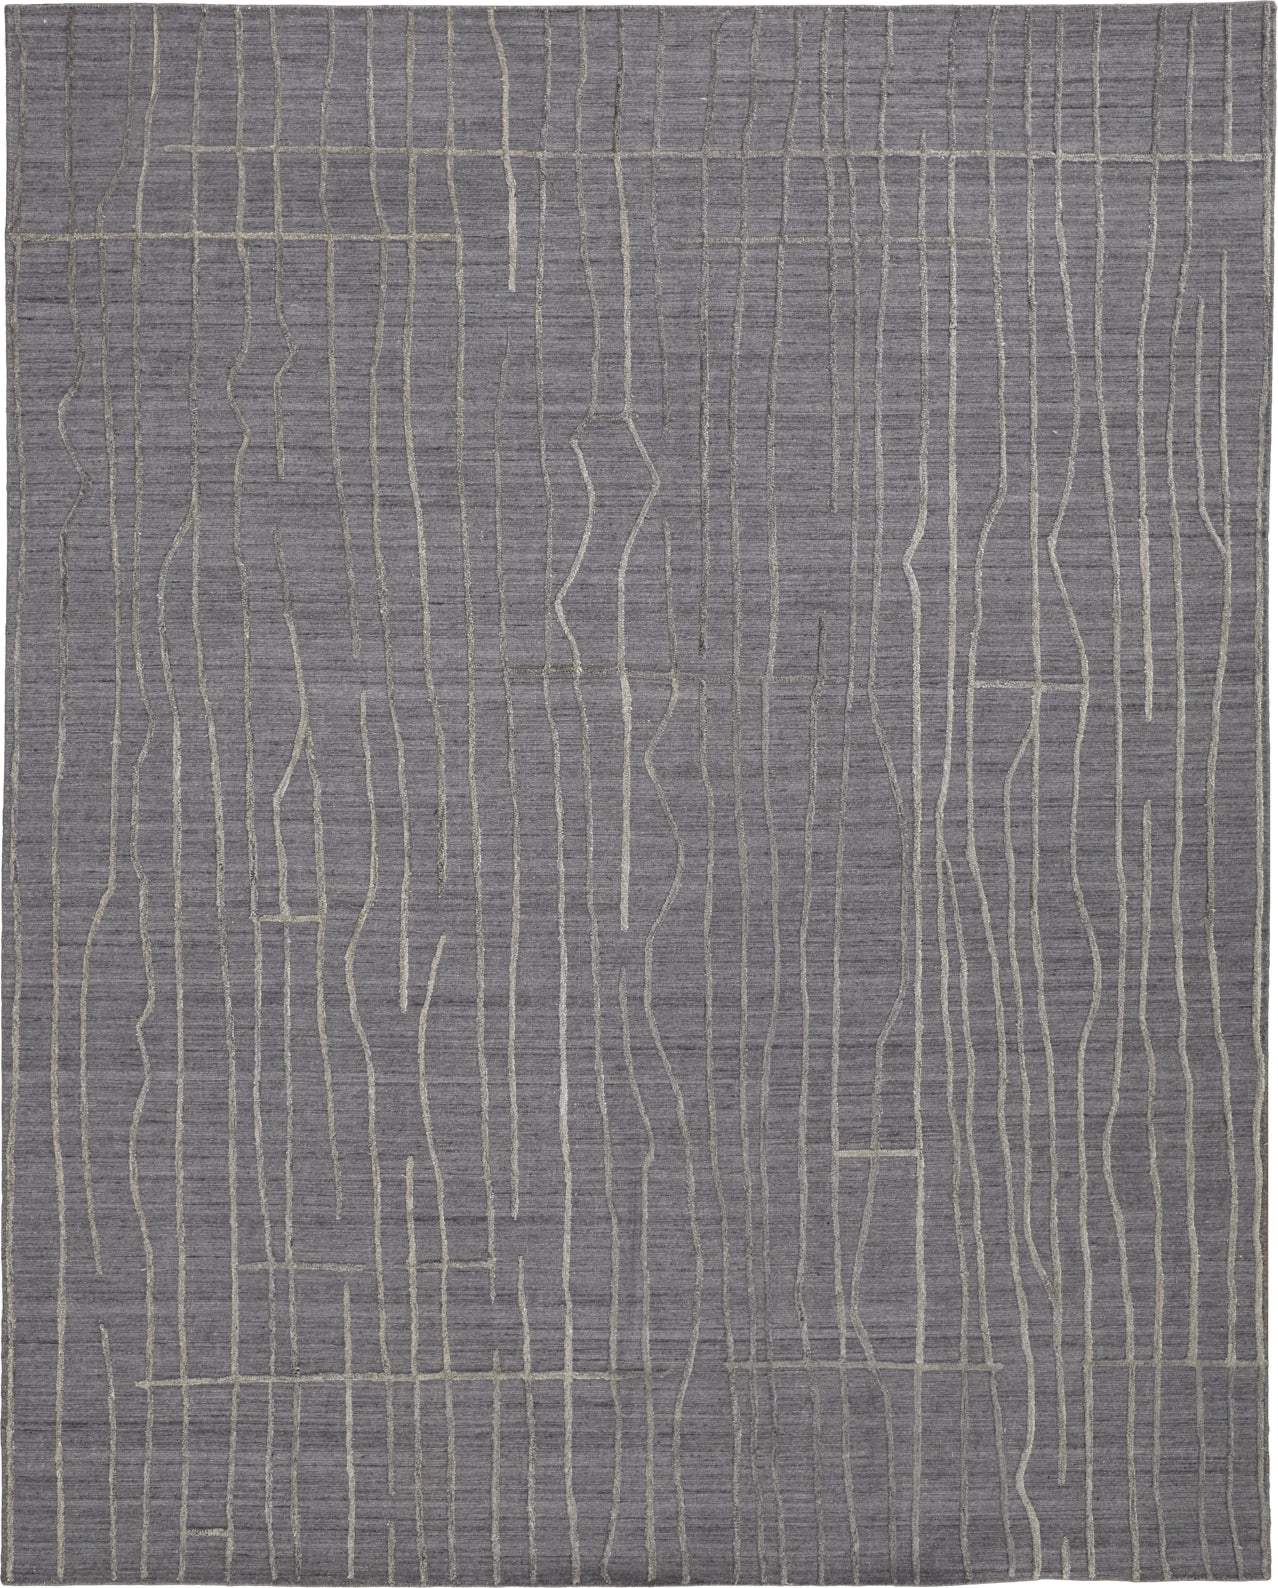 Feizy Haverhill T8000 Charcoal Area Rug by Thom Filicia